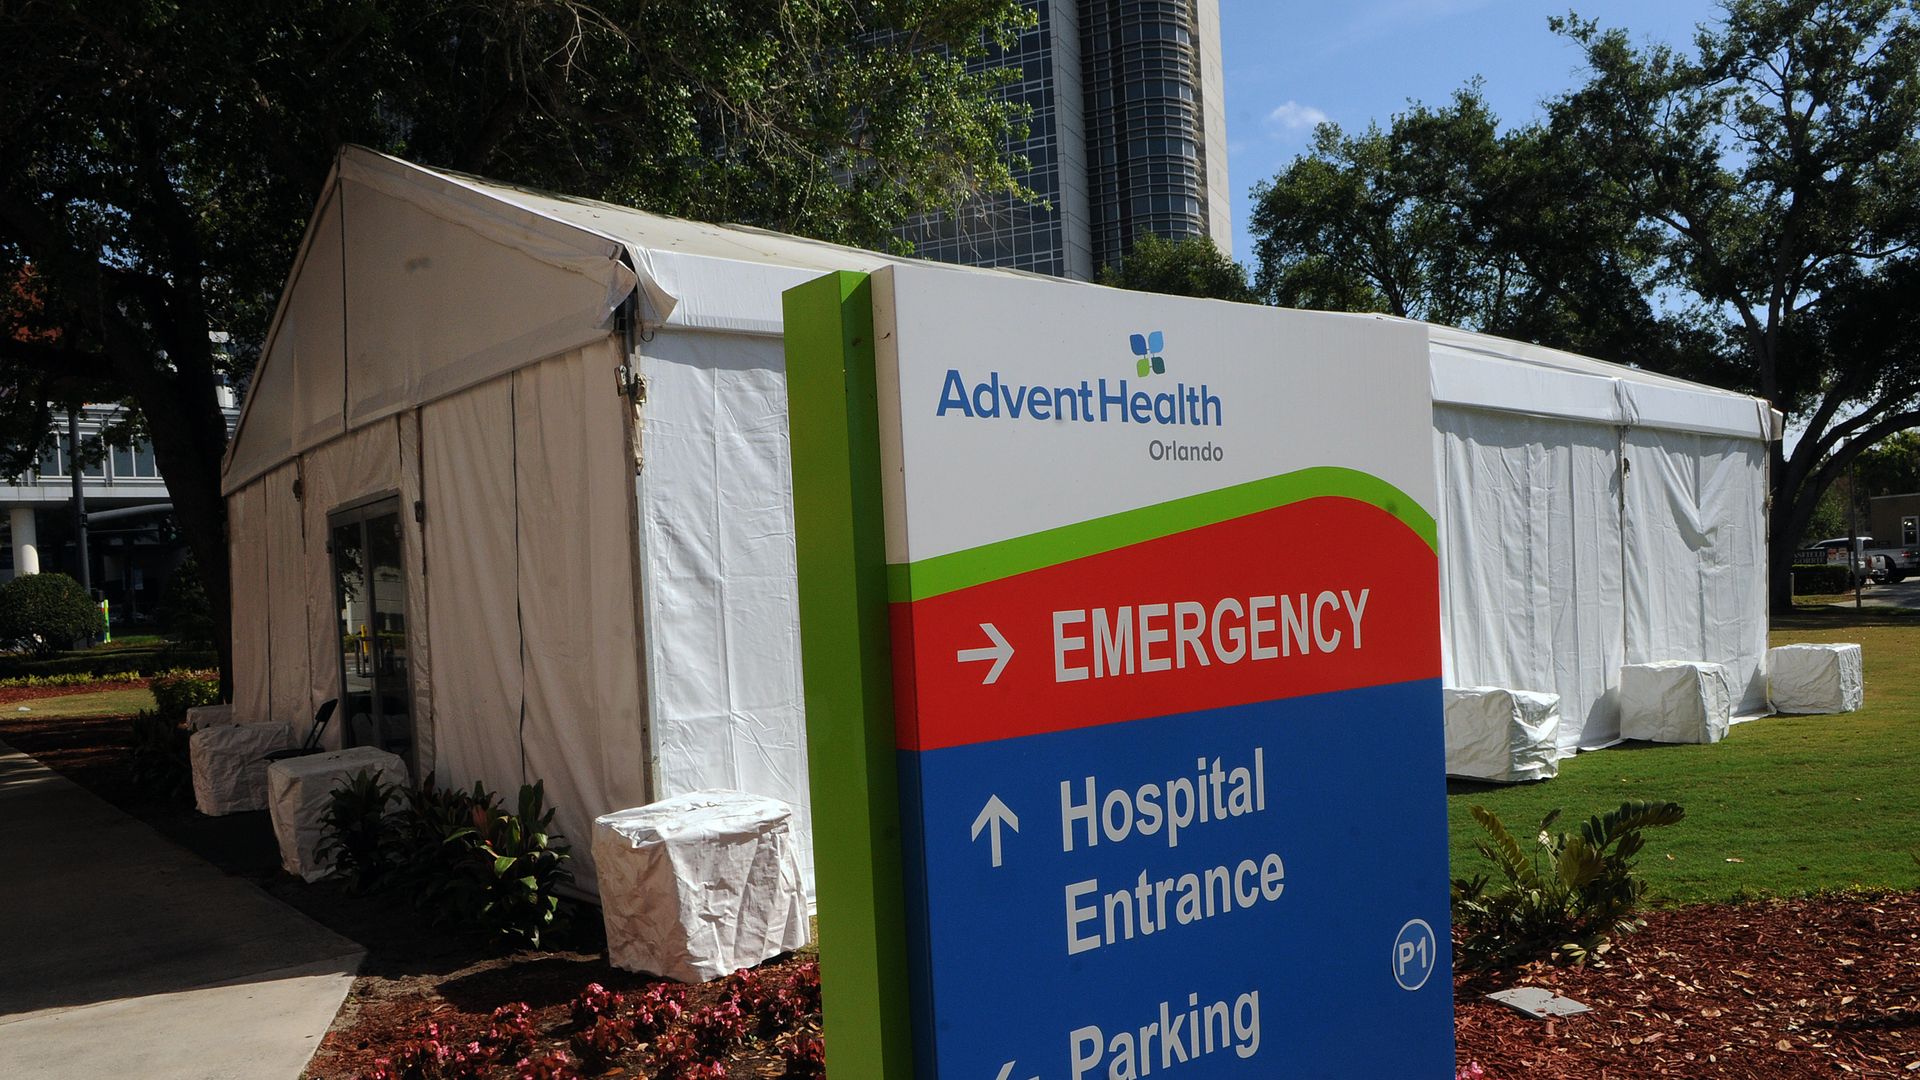 A white pop-up tent in front of an AdventHealth hospital emergency department sign.